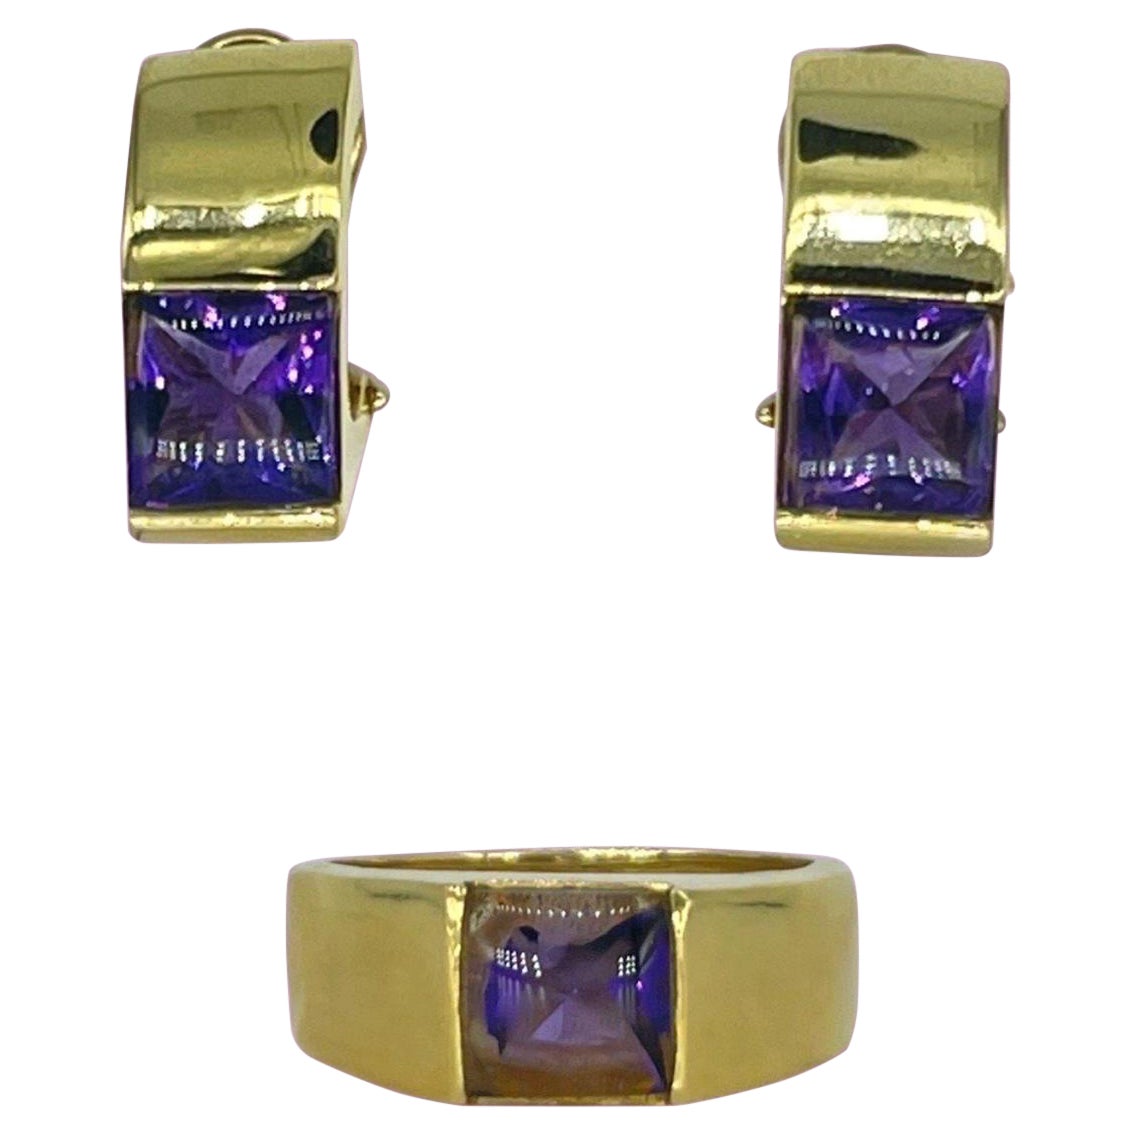 Vintage Rare Squared Cabochon Cut Amethyst Gemstone Earrings and Ring Set 18k 